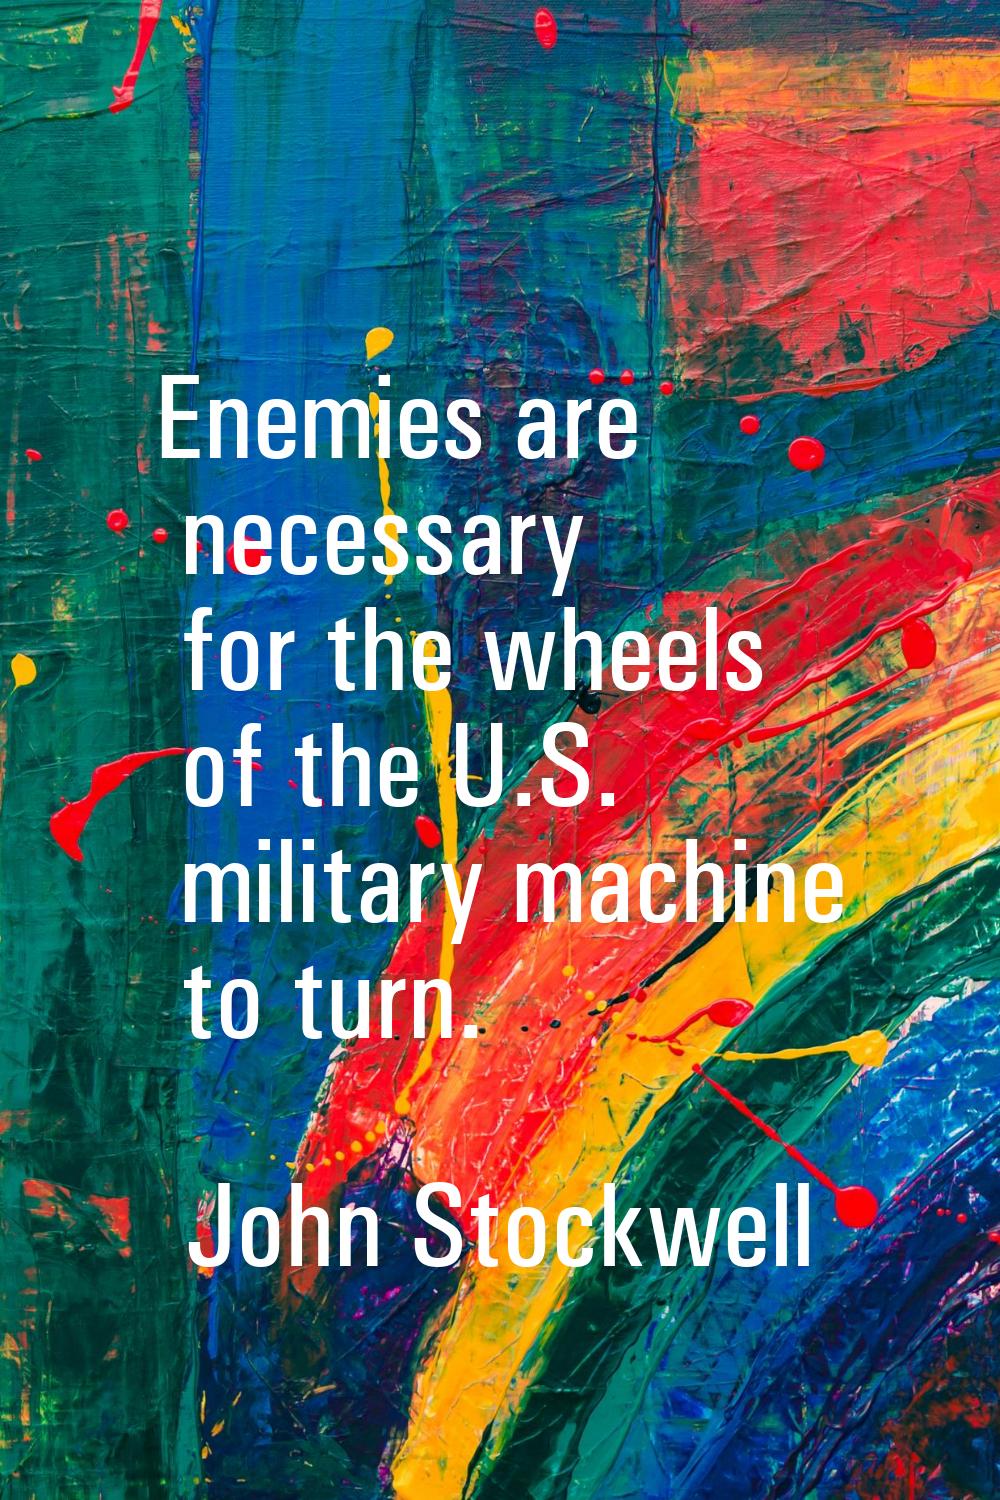 Enemies are necessary for the wheels of the U.S. military machine to turn.